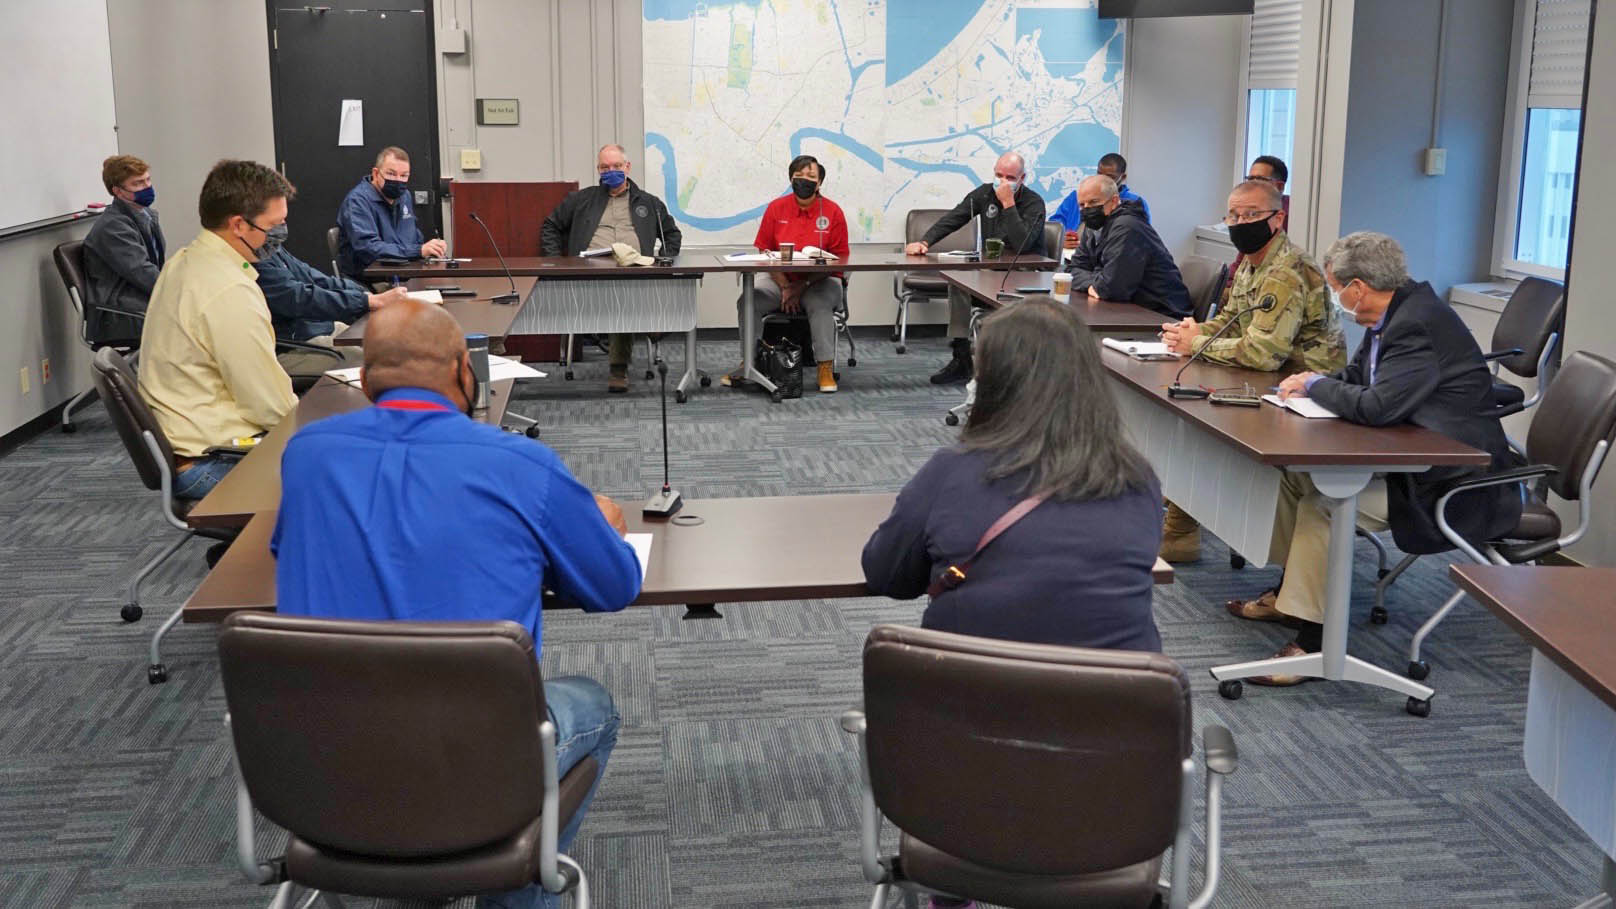 FEMA Administrator Pete Gaynor meets with staff from the New Orleans Office of Homeland Security and Emergency Preparedness and tours their emergency operations center during a visit following Hurricane Zeta.